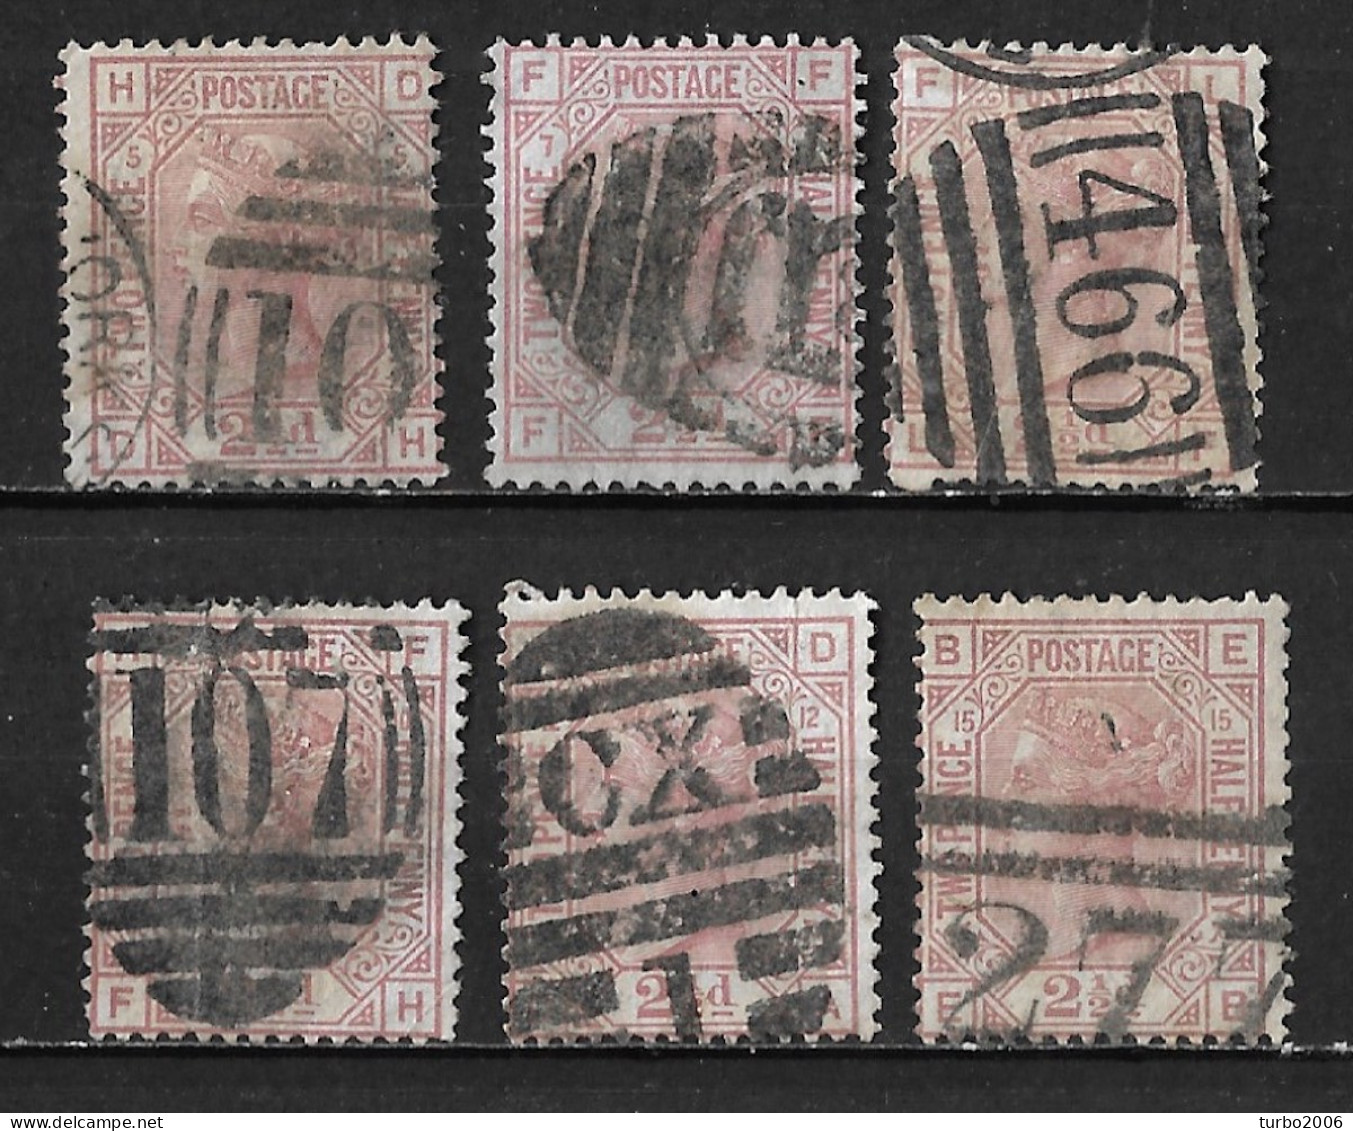 G.B.1876 Queen Victoria 2½ P Lila Rose WM 10 Michel 47 (SG 141) 6 Different Plates 5-7-9-10-12-15 As Shown On 7 Scans - Usados